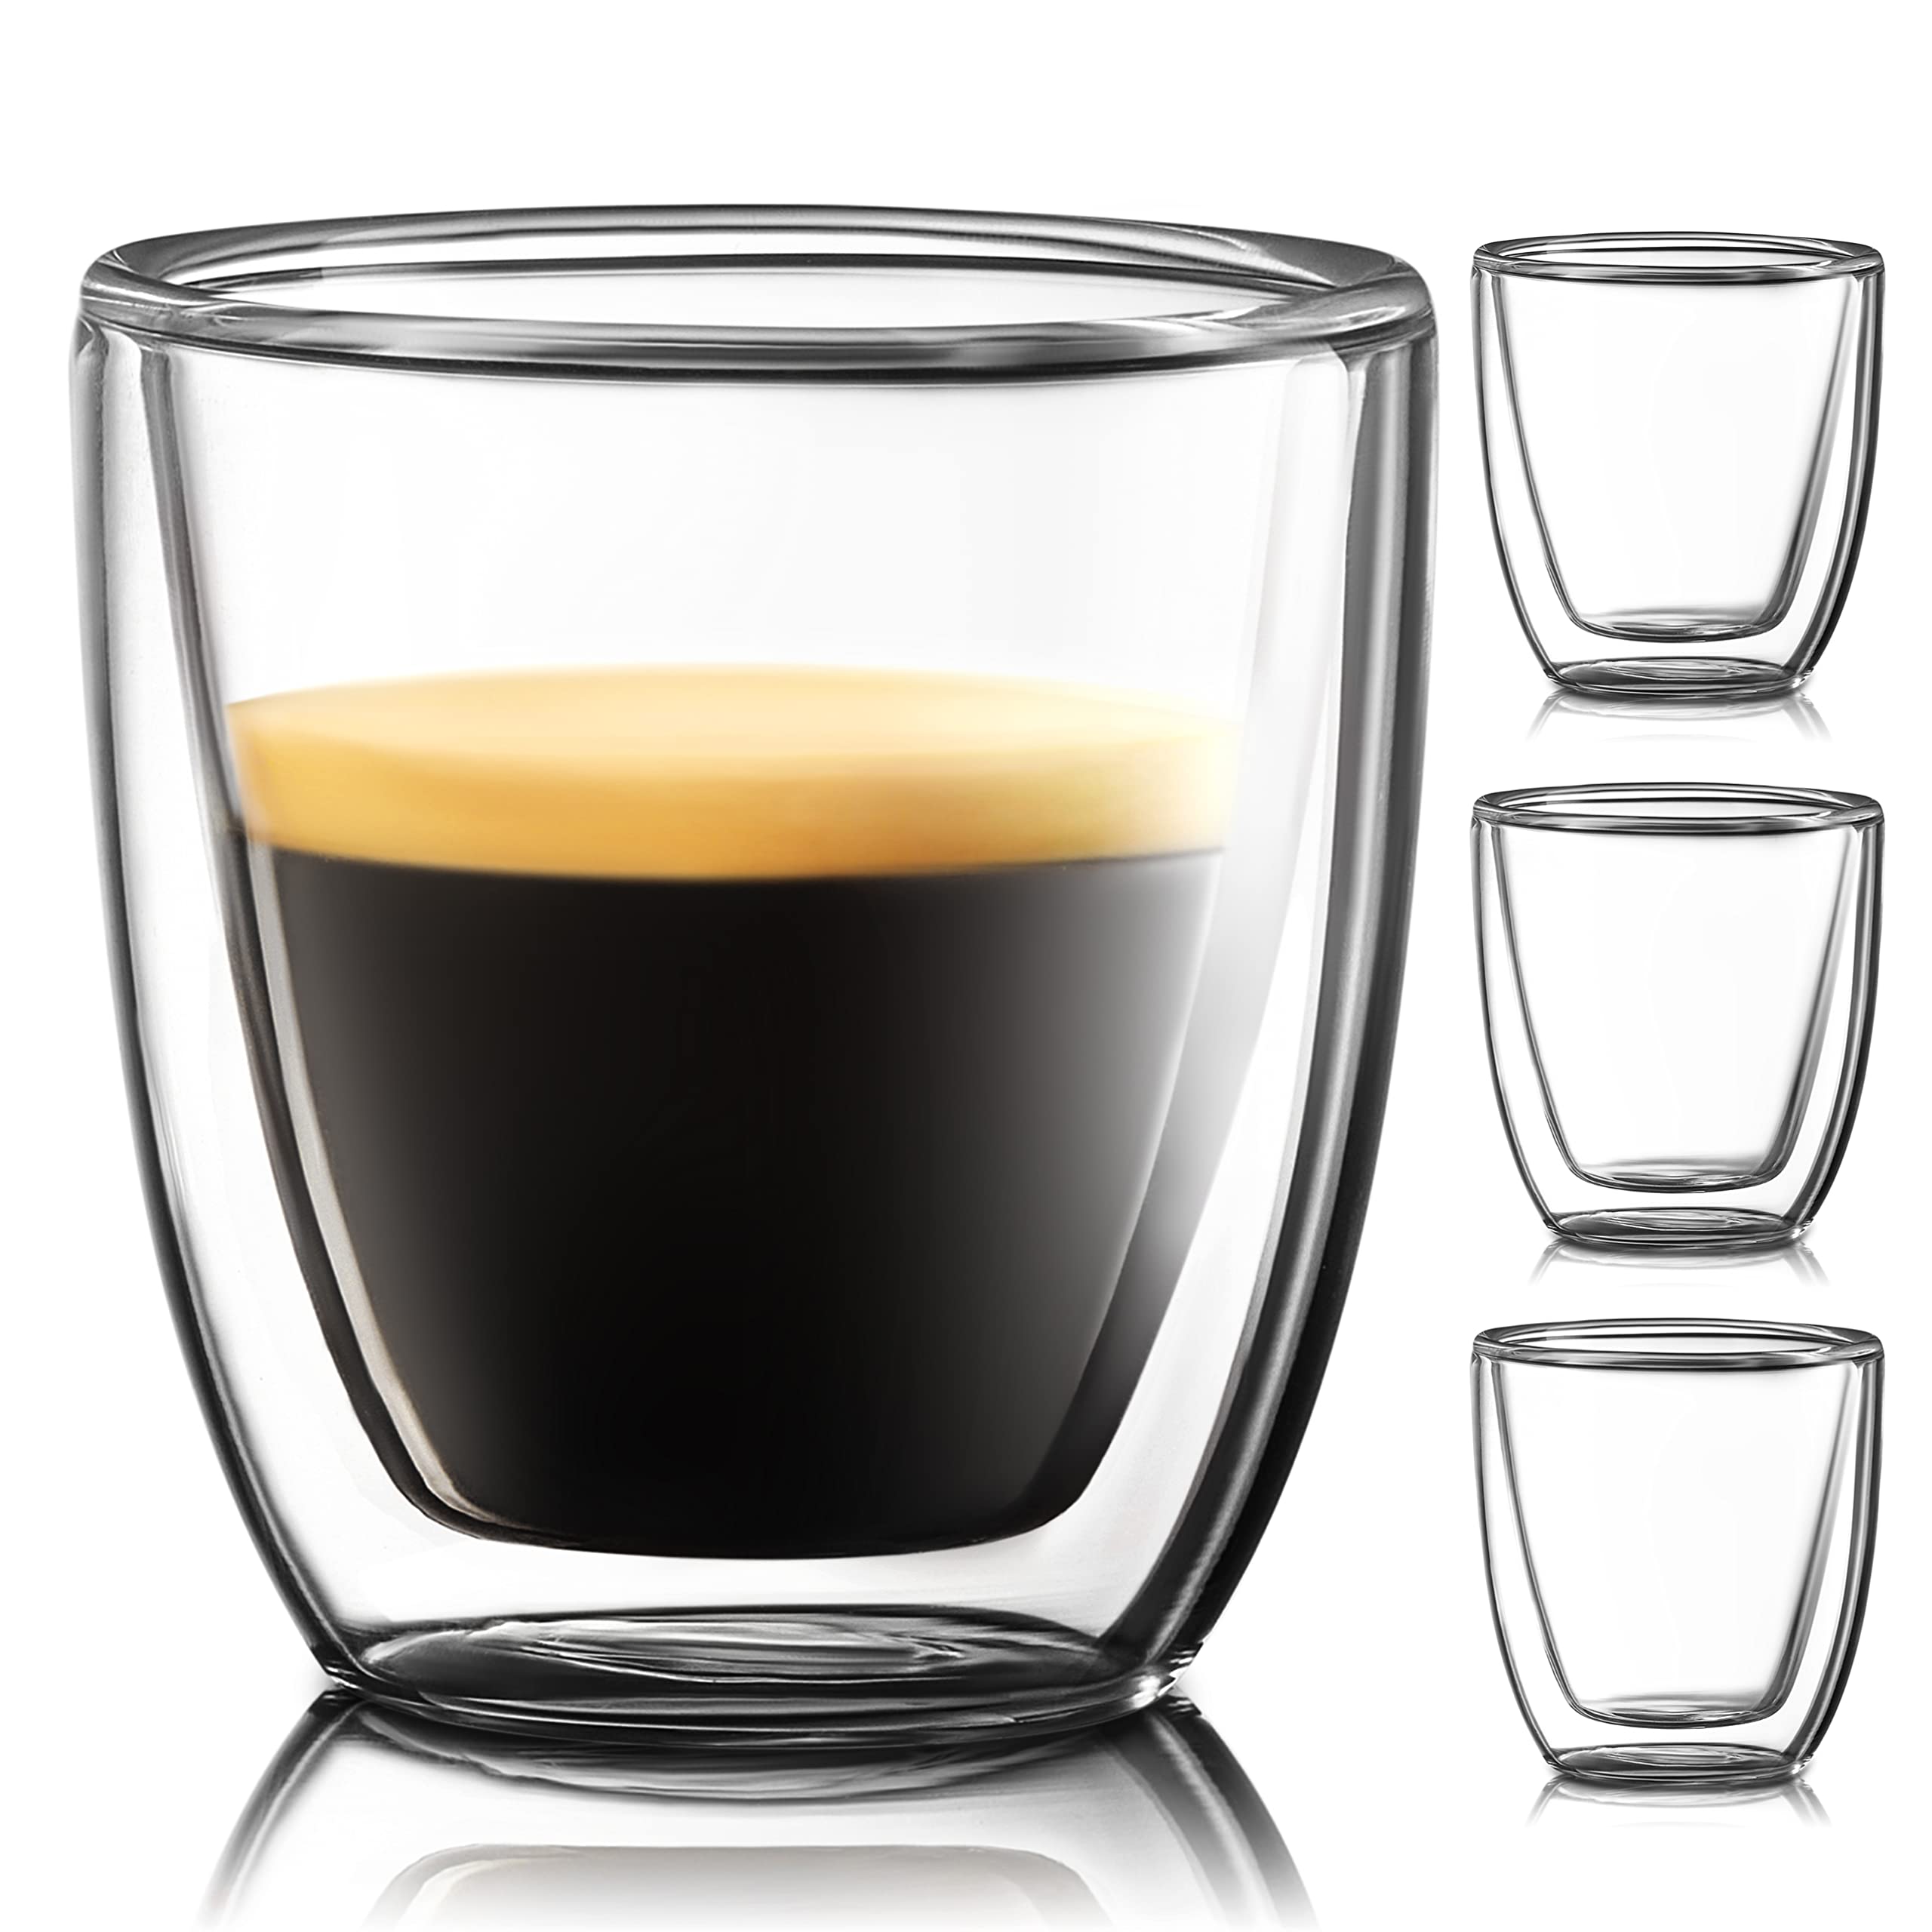 Glass Espresso Cups Set of 4 - Double Walled Espresso Cups 2.7 OZ - Wide Italian Style Clear Doppio Espresso Cup - Double Espresso Cups - Espresso Accessories Small Double Wall Expresso Coffee Cup